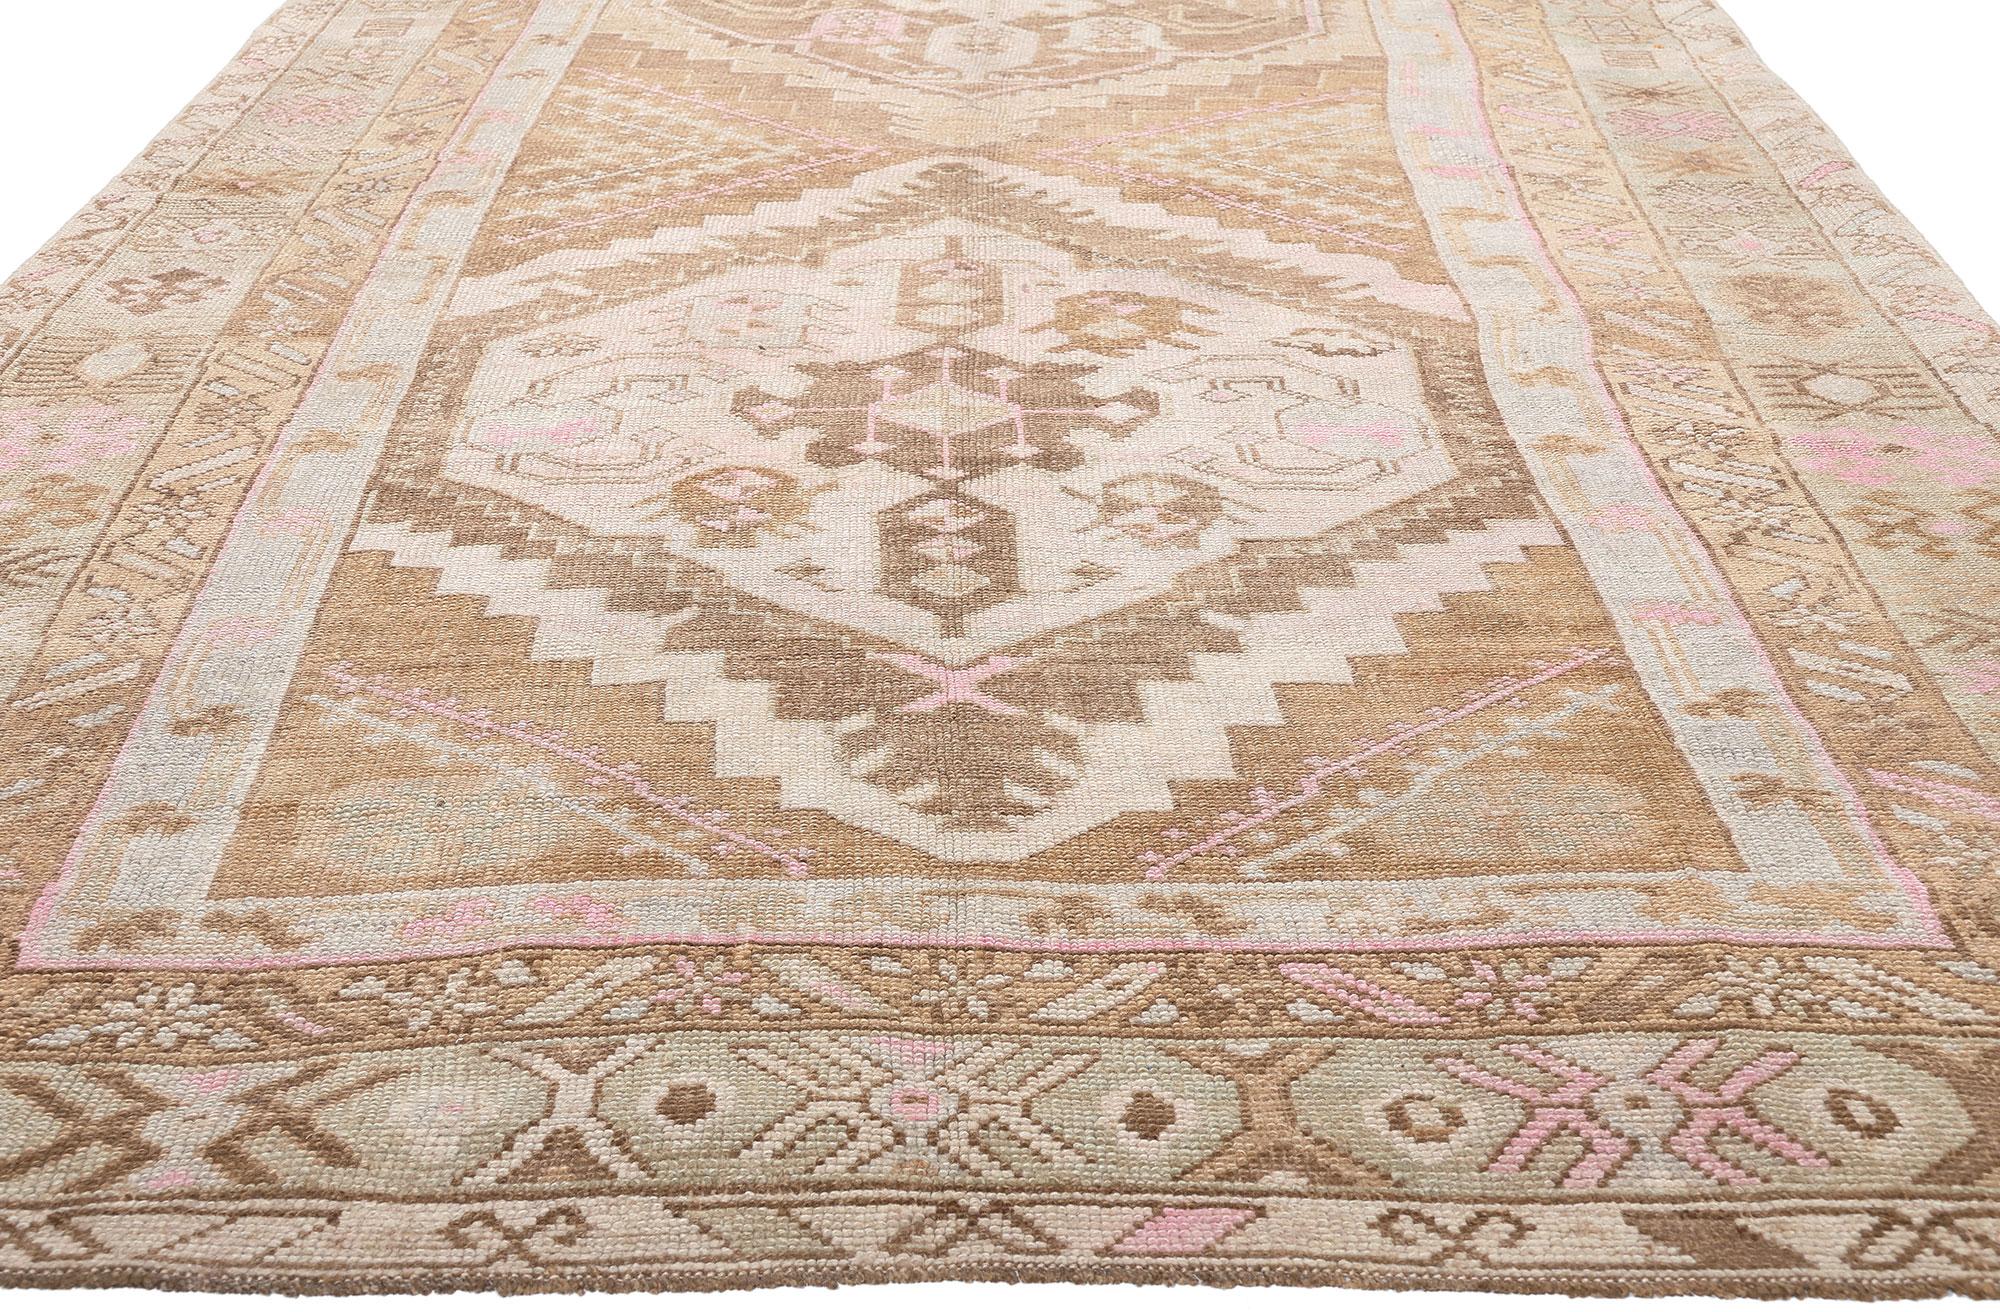 Soft Earth-Tone Vintage Turkish Oushak Rug, Boho Chic Style Meets Shibui  In Good Condition For Sale In Dallas, TX